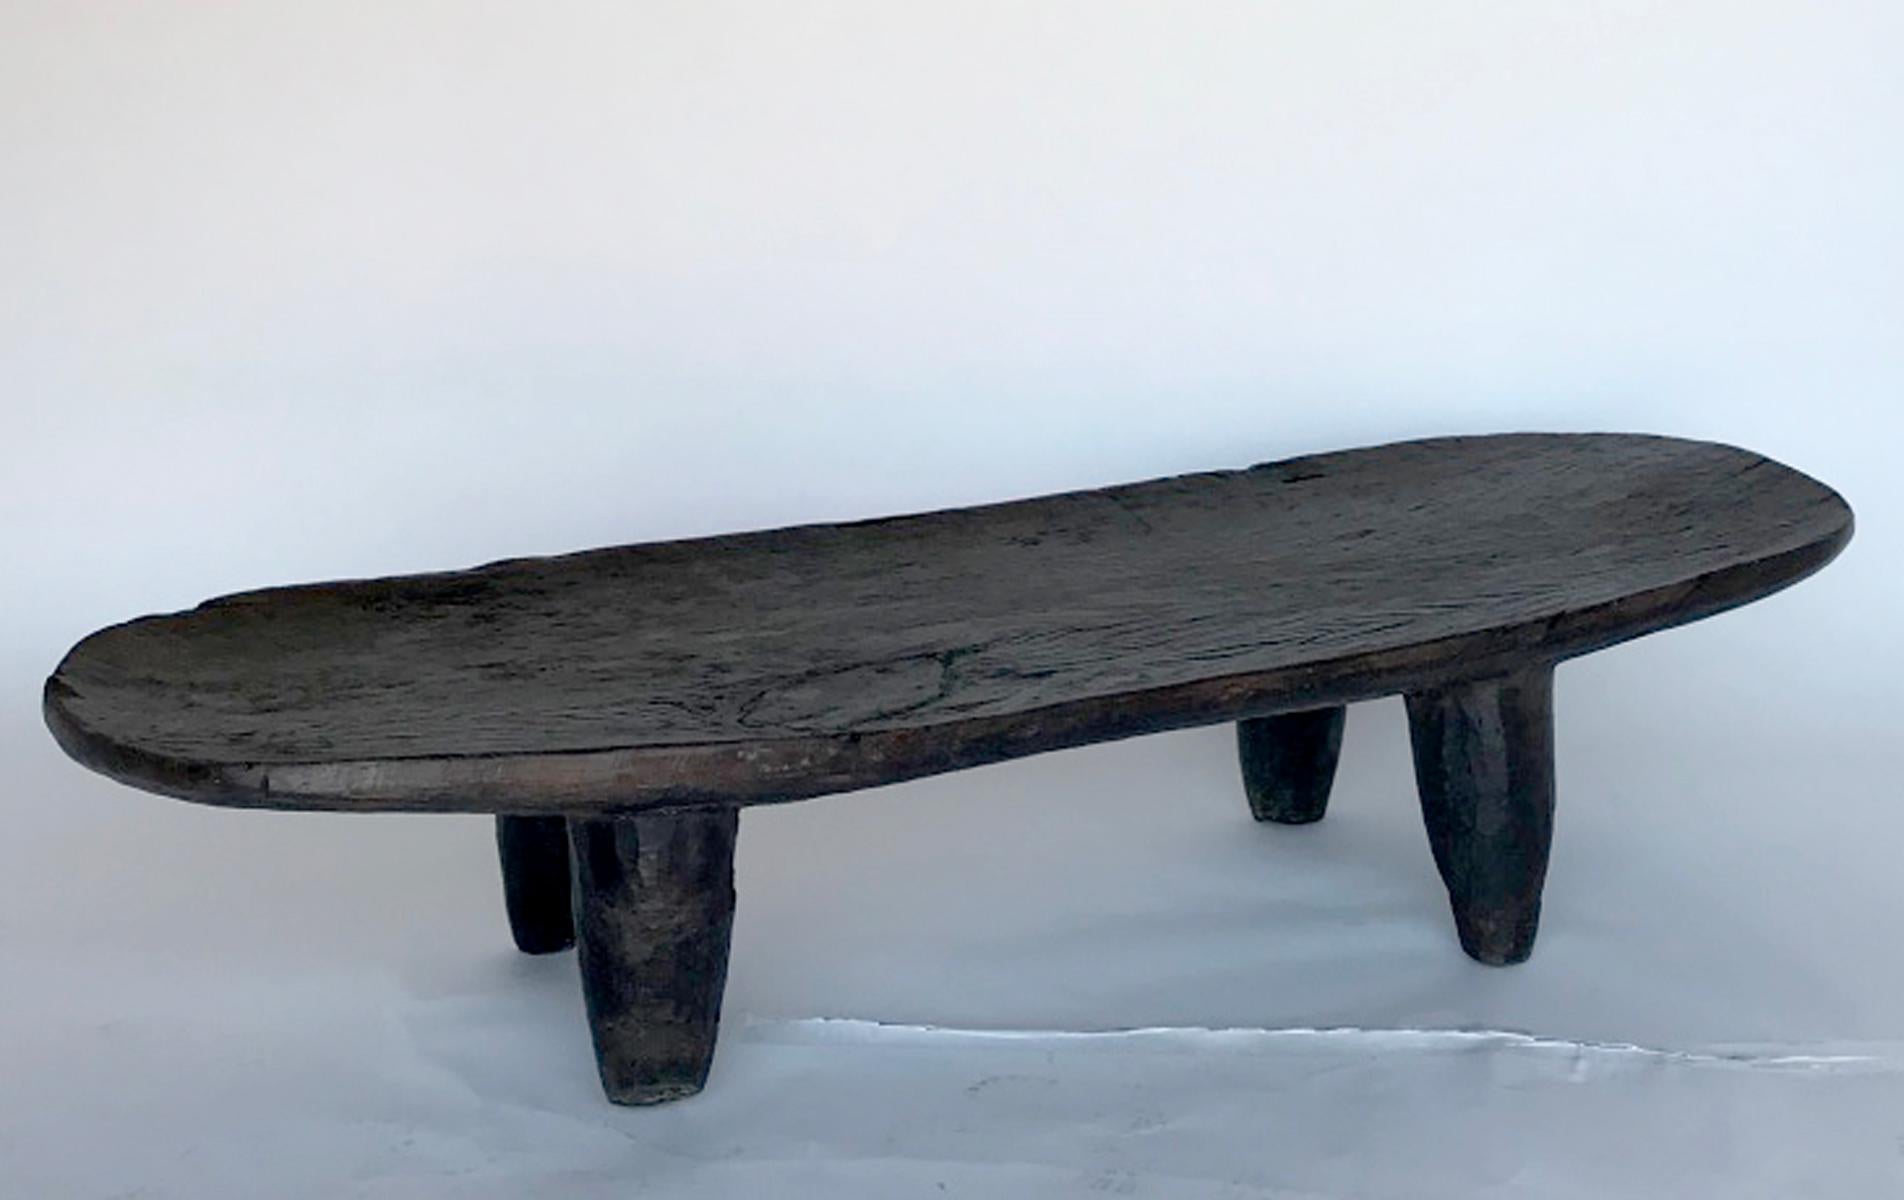 This ld bed is carved out of one piece of wood and features an oval top and conical legs. The color is a very dark brown. It has some old repairs on leg and on the top. From the Super tribe in Northern Nigeria. Completely sturdy and functional.